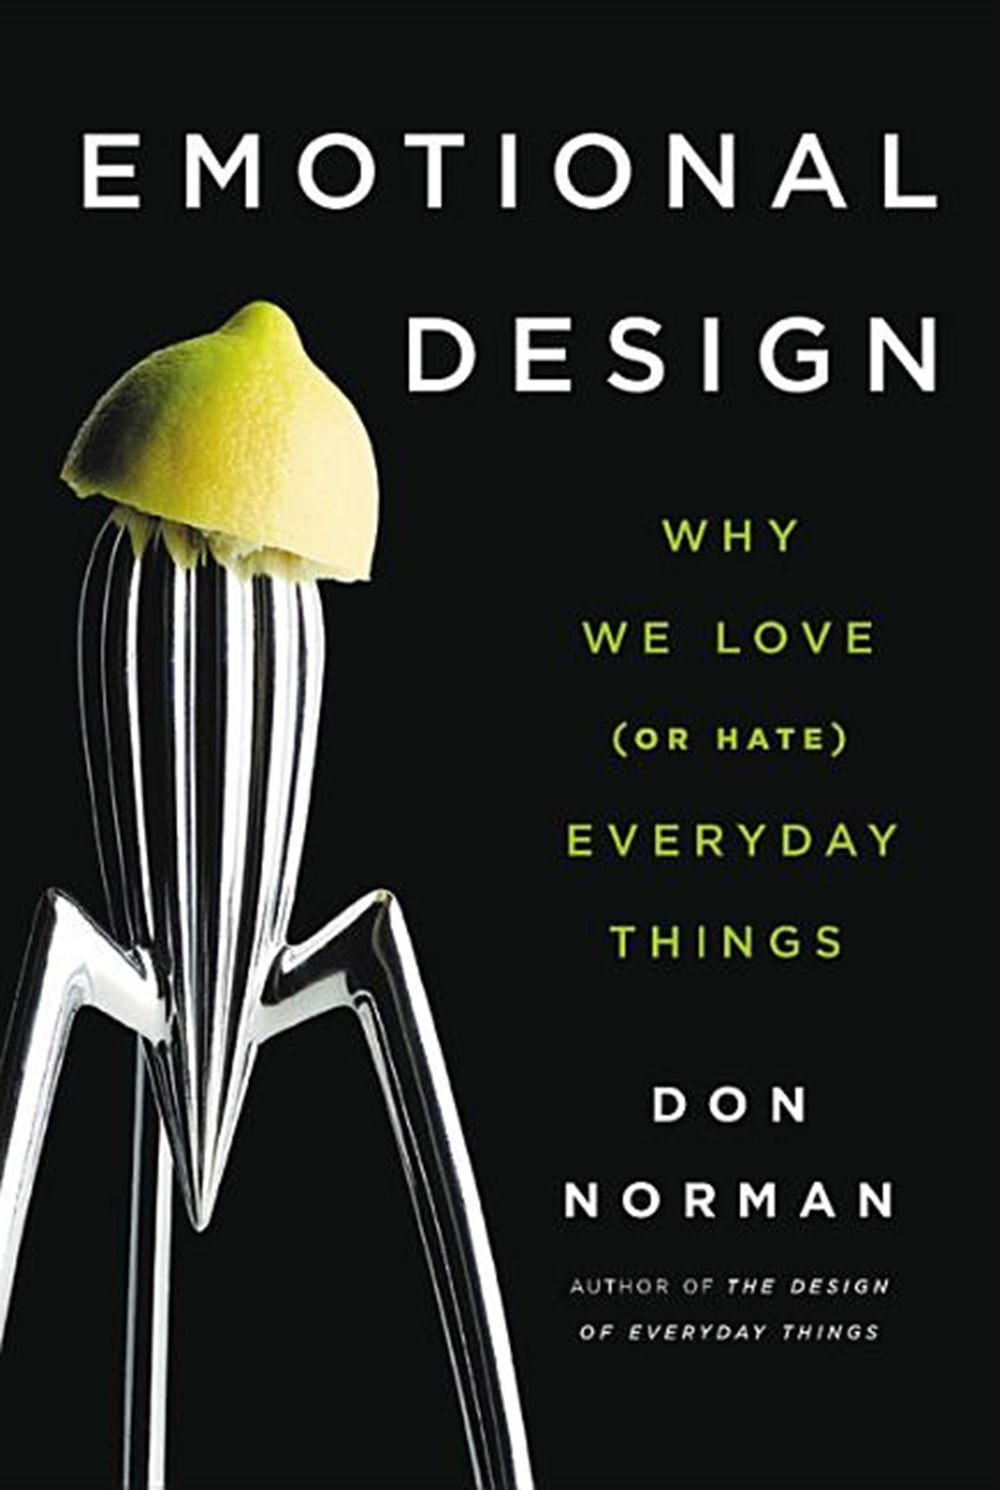 Emotional Design Why We Love (or Hate) Everyday Things